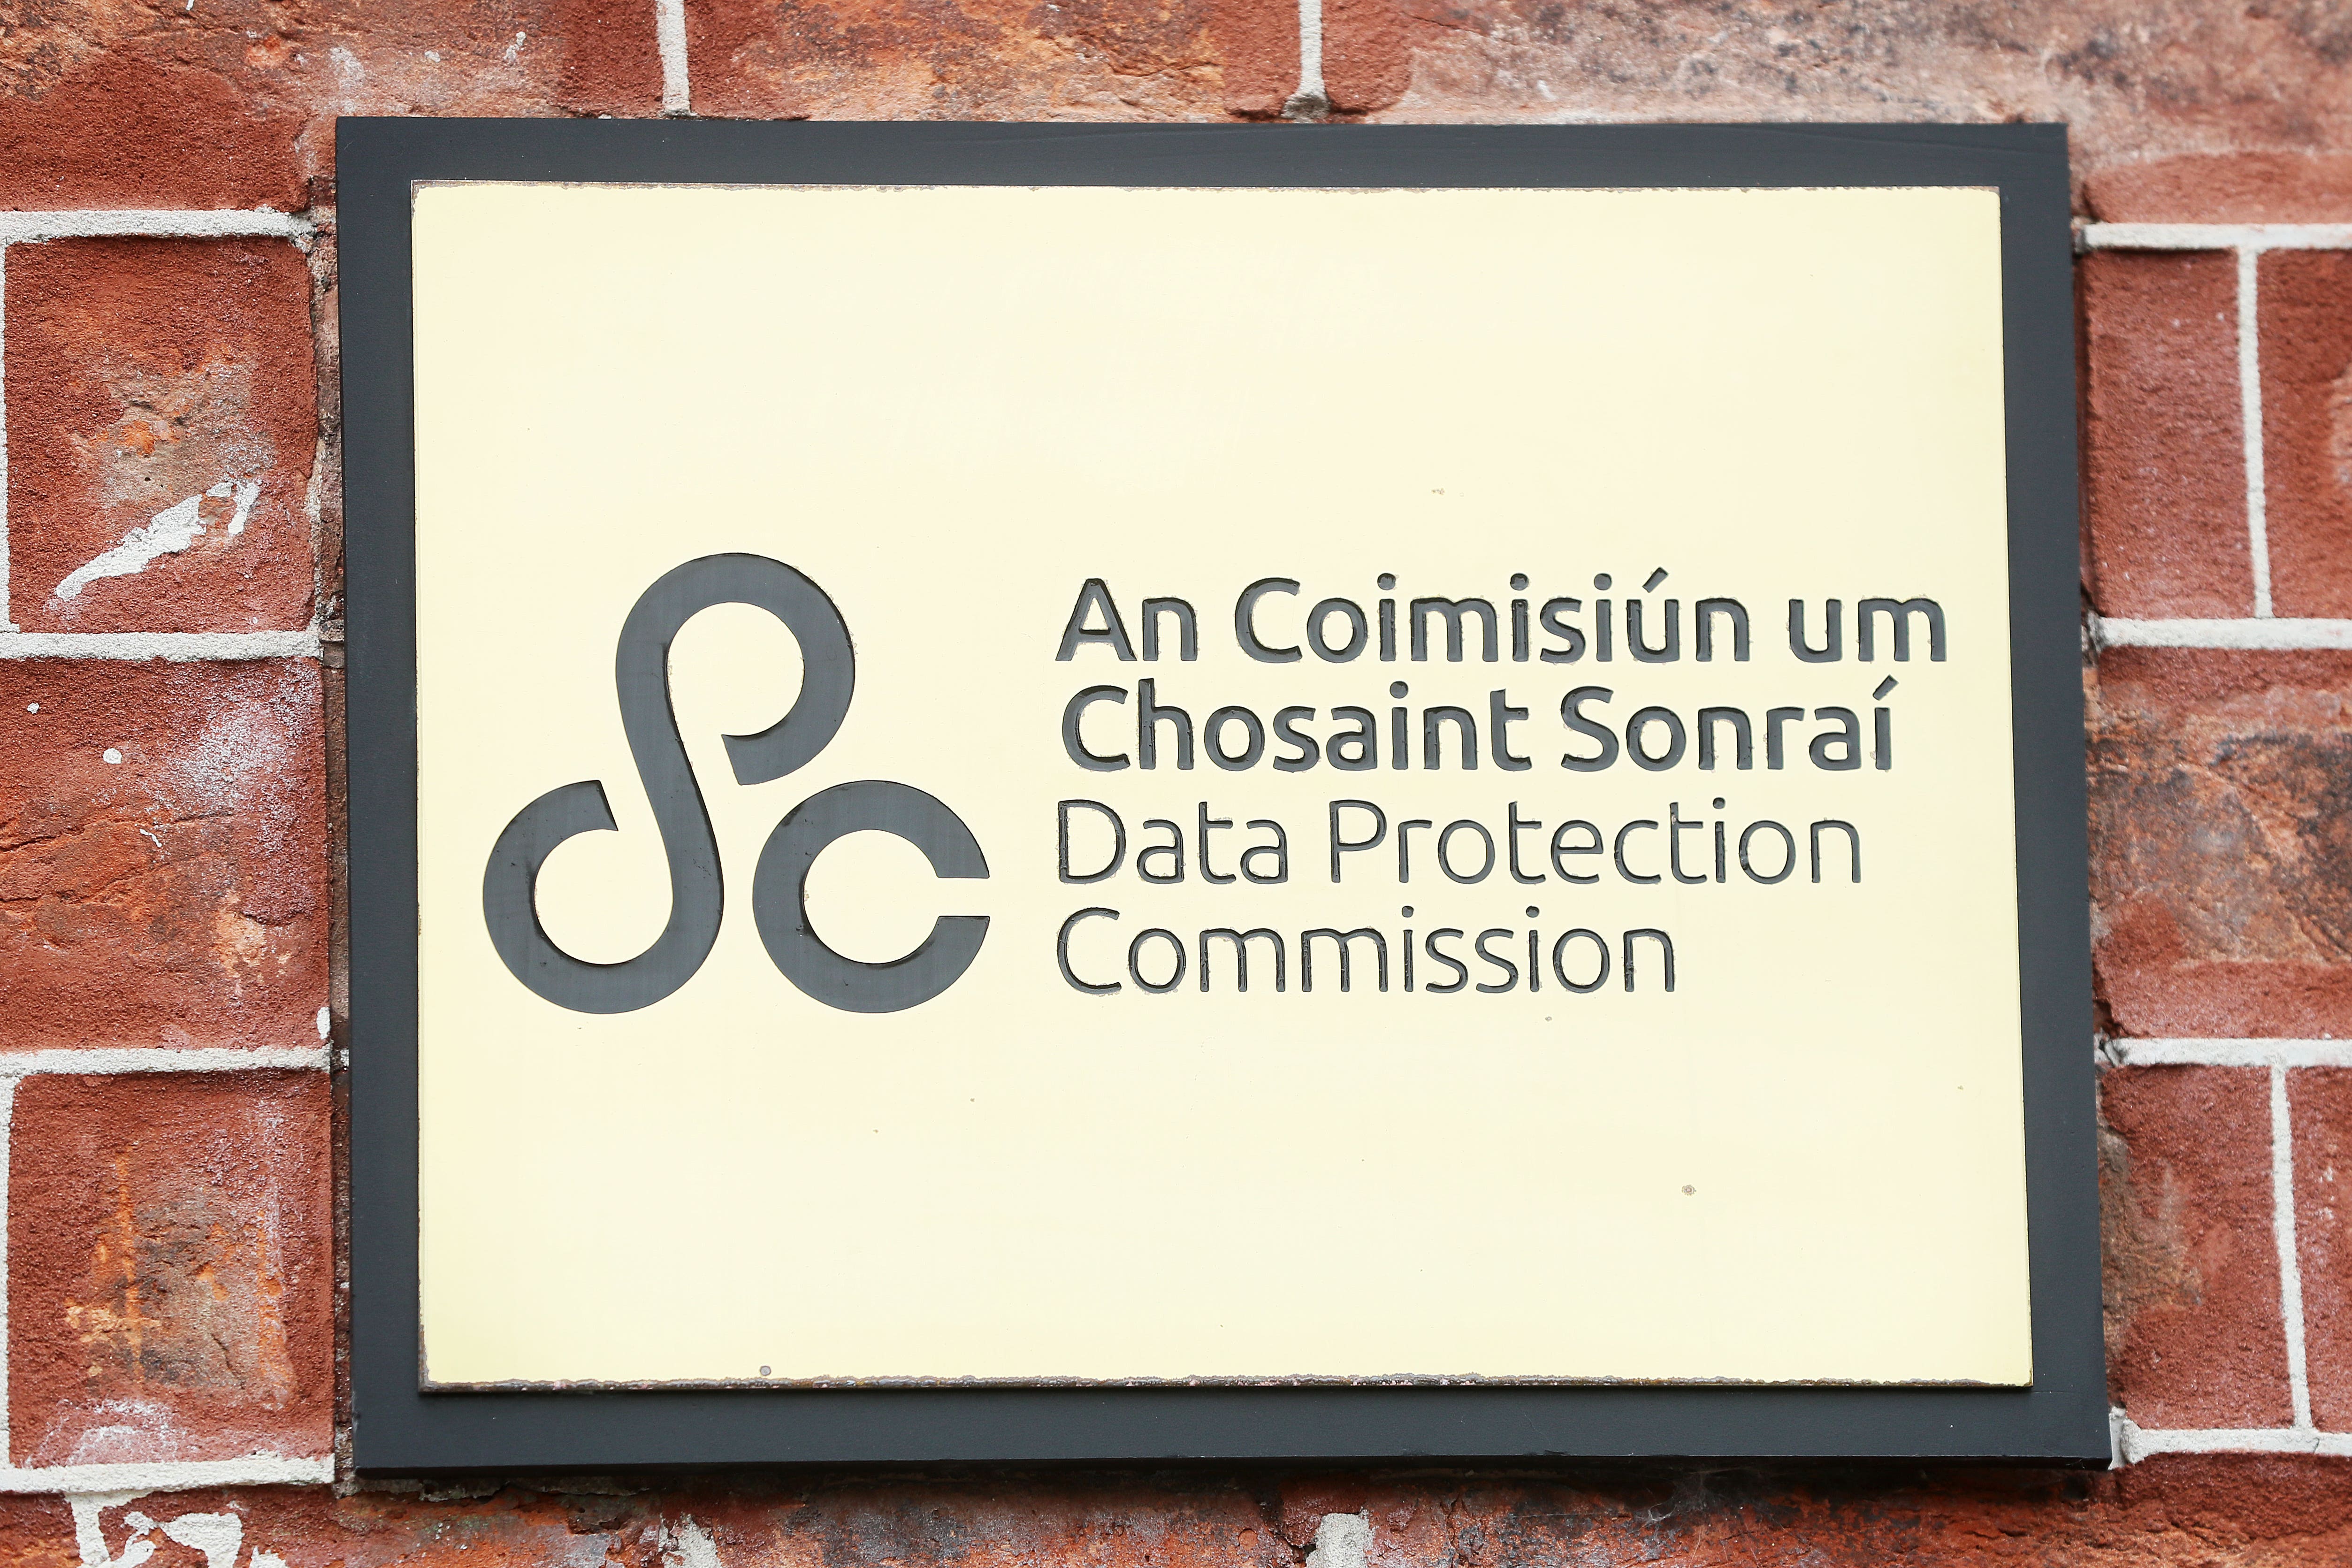 A plaque outside the offices of the Data Protection Commission in Dublin. WhatsApp has been hit with a fine of 225 million euros by the data protection commissioner, following an investigation into GDPR practices at the company. Picture date: Thursday September 2, 2021.